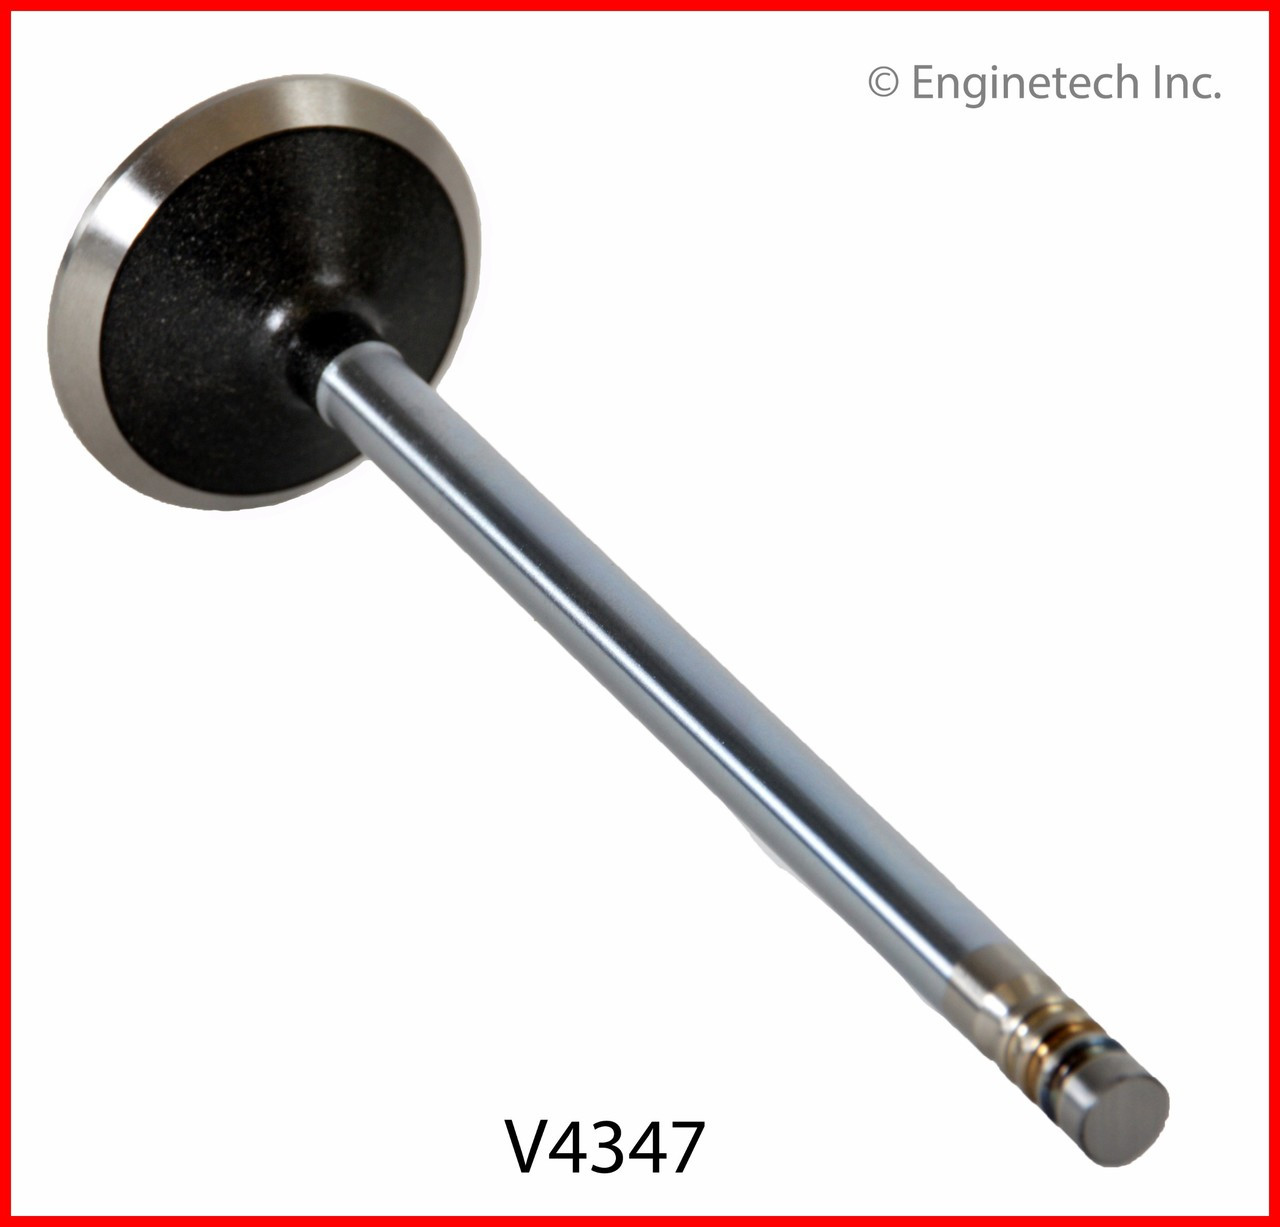 Exhaust Valve - 2001 Chrysler Town & Country 3.3L (V4347.A3)